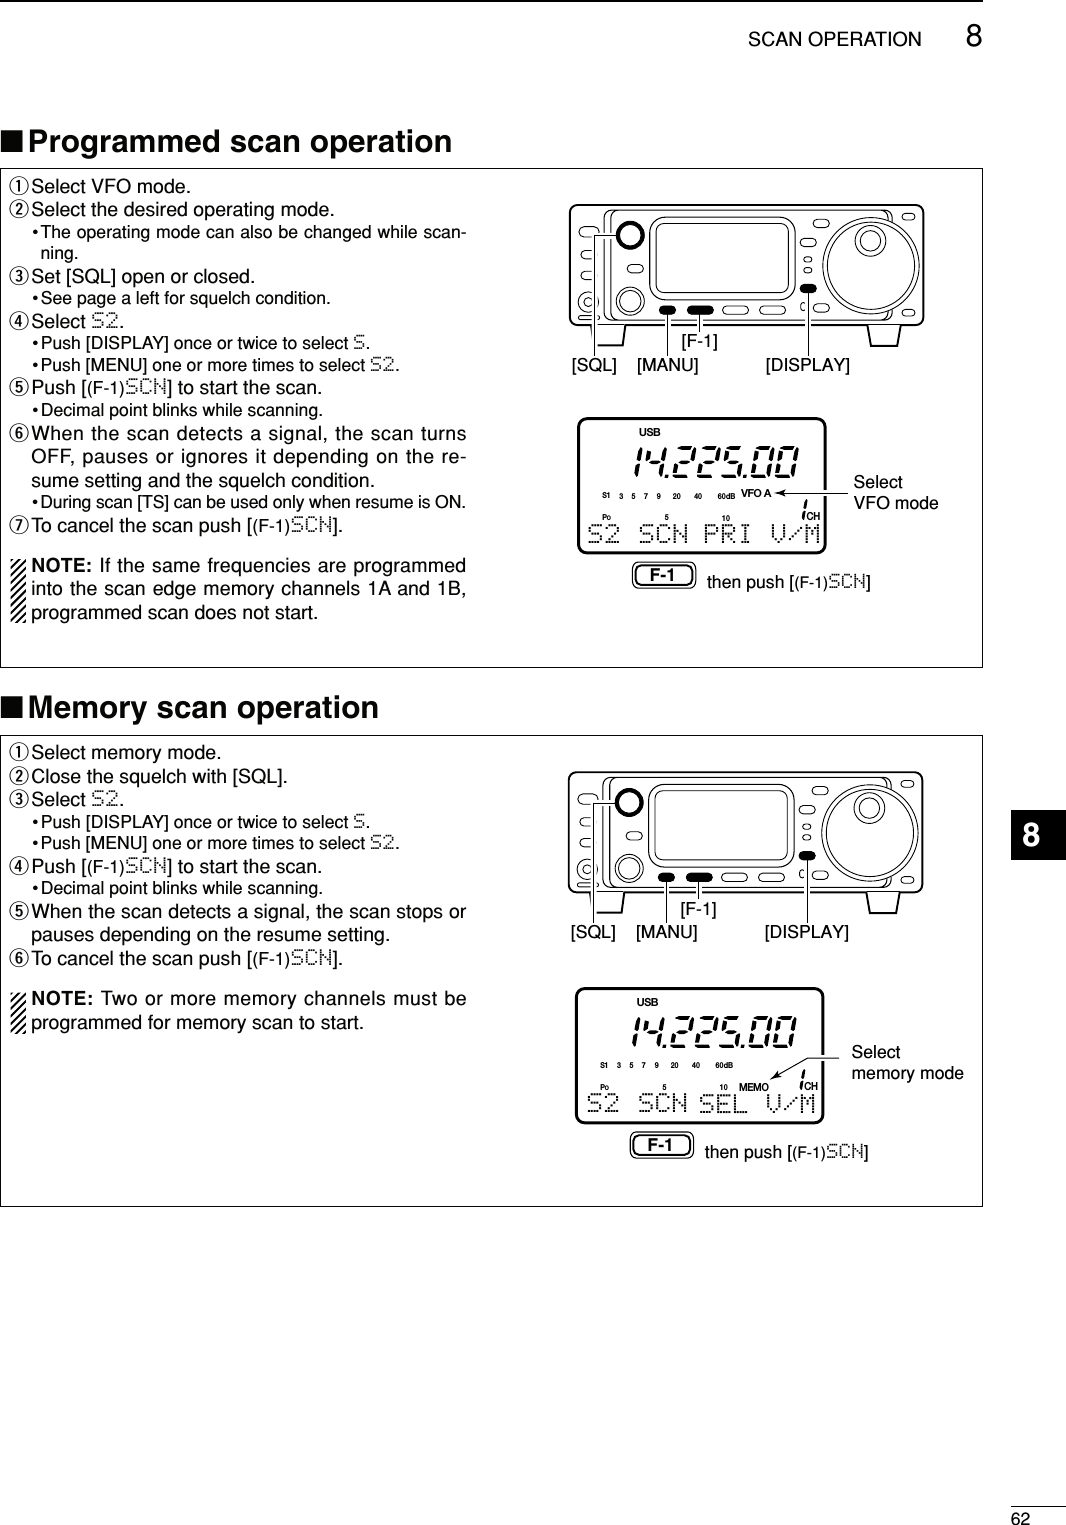 628SCAN OPERATIONqSelect VFO mode.wSelect the desired operating mode.•The operating mode can also be changed while scan-ning.eSet [SQL] open or closed.• See page a left for squelch condition.rSelect S2.• Push [DISPLAY] once or twice to select S.•Push [MENU] one or more times to select S2.tPush [(F-1)SCN] to start the scan.• Decimal point blinks while scanning.yWhen the scan detects a signal, the scan turnsOFF, pauses or ignores it depending on the re-sume setting and the squelch condition.•During scan [TS] can be used only when resume is ON.uTo cancel the scan push [(F-1)SCN].NOTE:If the same frequencies are programmedinto the scan edge memory channels 1A and 1B,programmed scan does not start.CHVFO APOS15537920401060dBUSBS2 SCN PRI V/MSelectVFO modeF-1 then push [(F-1)SCN][DISPLAY][F-1][MANU][SQL]■Programmed scan operationqSelect memory mode.wClose the squelch with [SQL].eSelect S2.• Push [DISPLAY] once or twice to select S.•Push [MENU] one or more times to select S2.rPush [(F-1)SCN] to start the scan.• Decimal point blinks while scanning.tWhen the scan detects a signal, the scan stops orpauses depending on the resume setting.yTo cancel the scan push [(F-1)SCN].NOTE:Two or more memory channels must beprogrammed for memory scan to start.S2 SCN SEL V/MSelectmemory modeF-1 then push [(F-1)SCN]CHMEMOPOS15537920401060dBUSB[DISPLAY][F-1][MANU][SQL]■Memory scan operation8